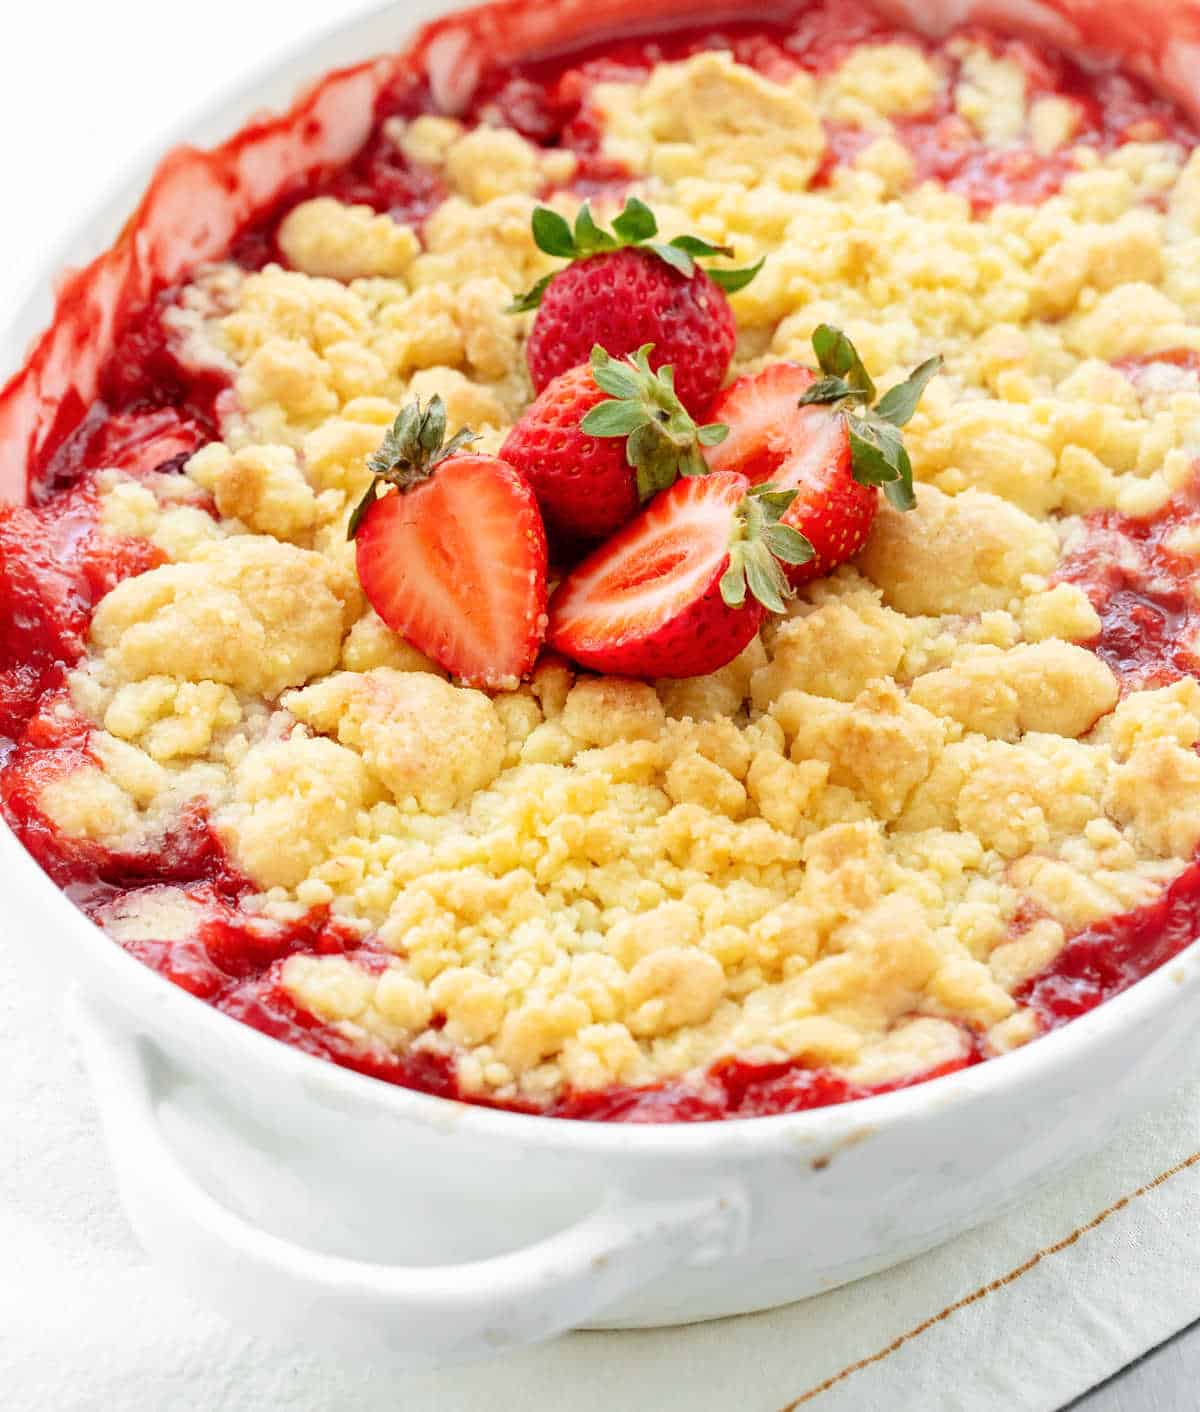 Strawberry dump cake in a baking dish with fresh strawberries on top.